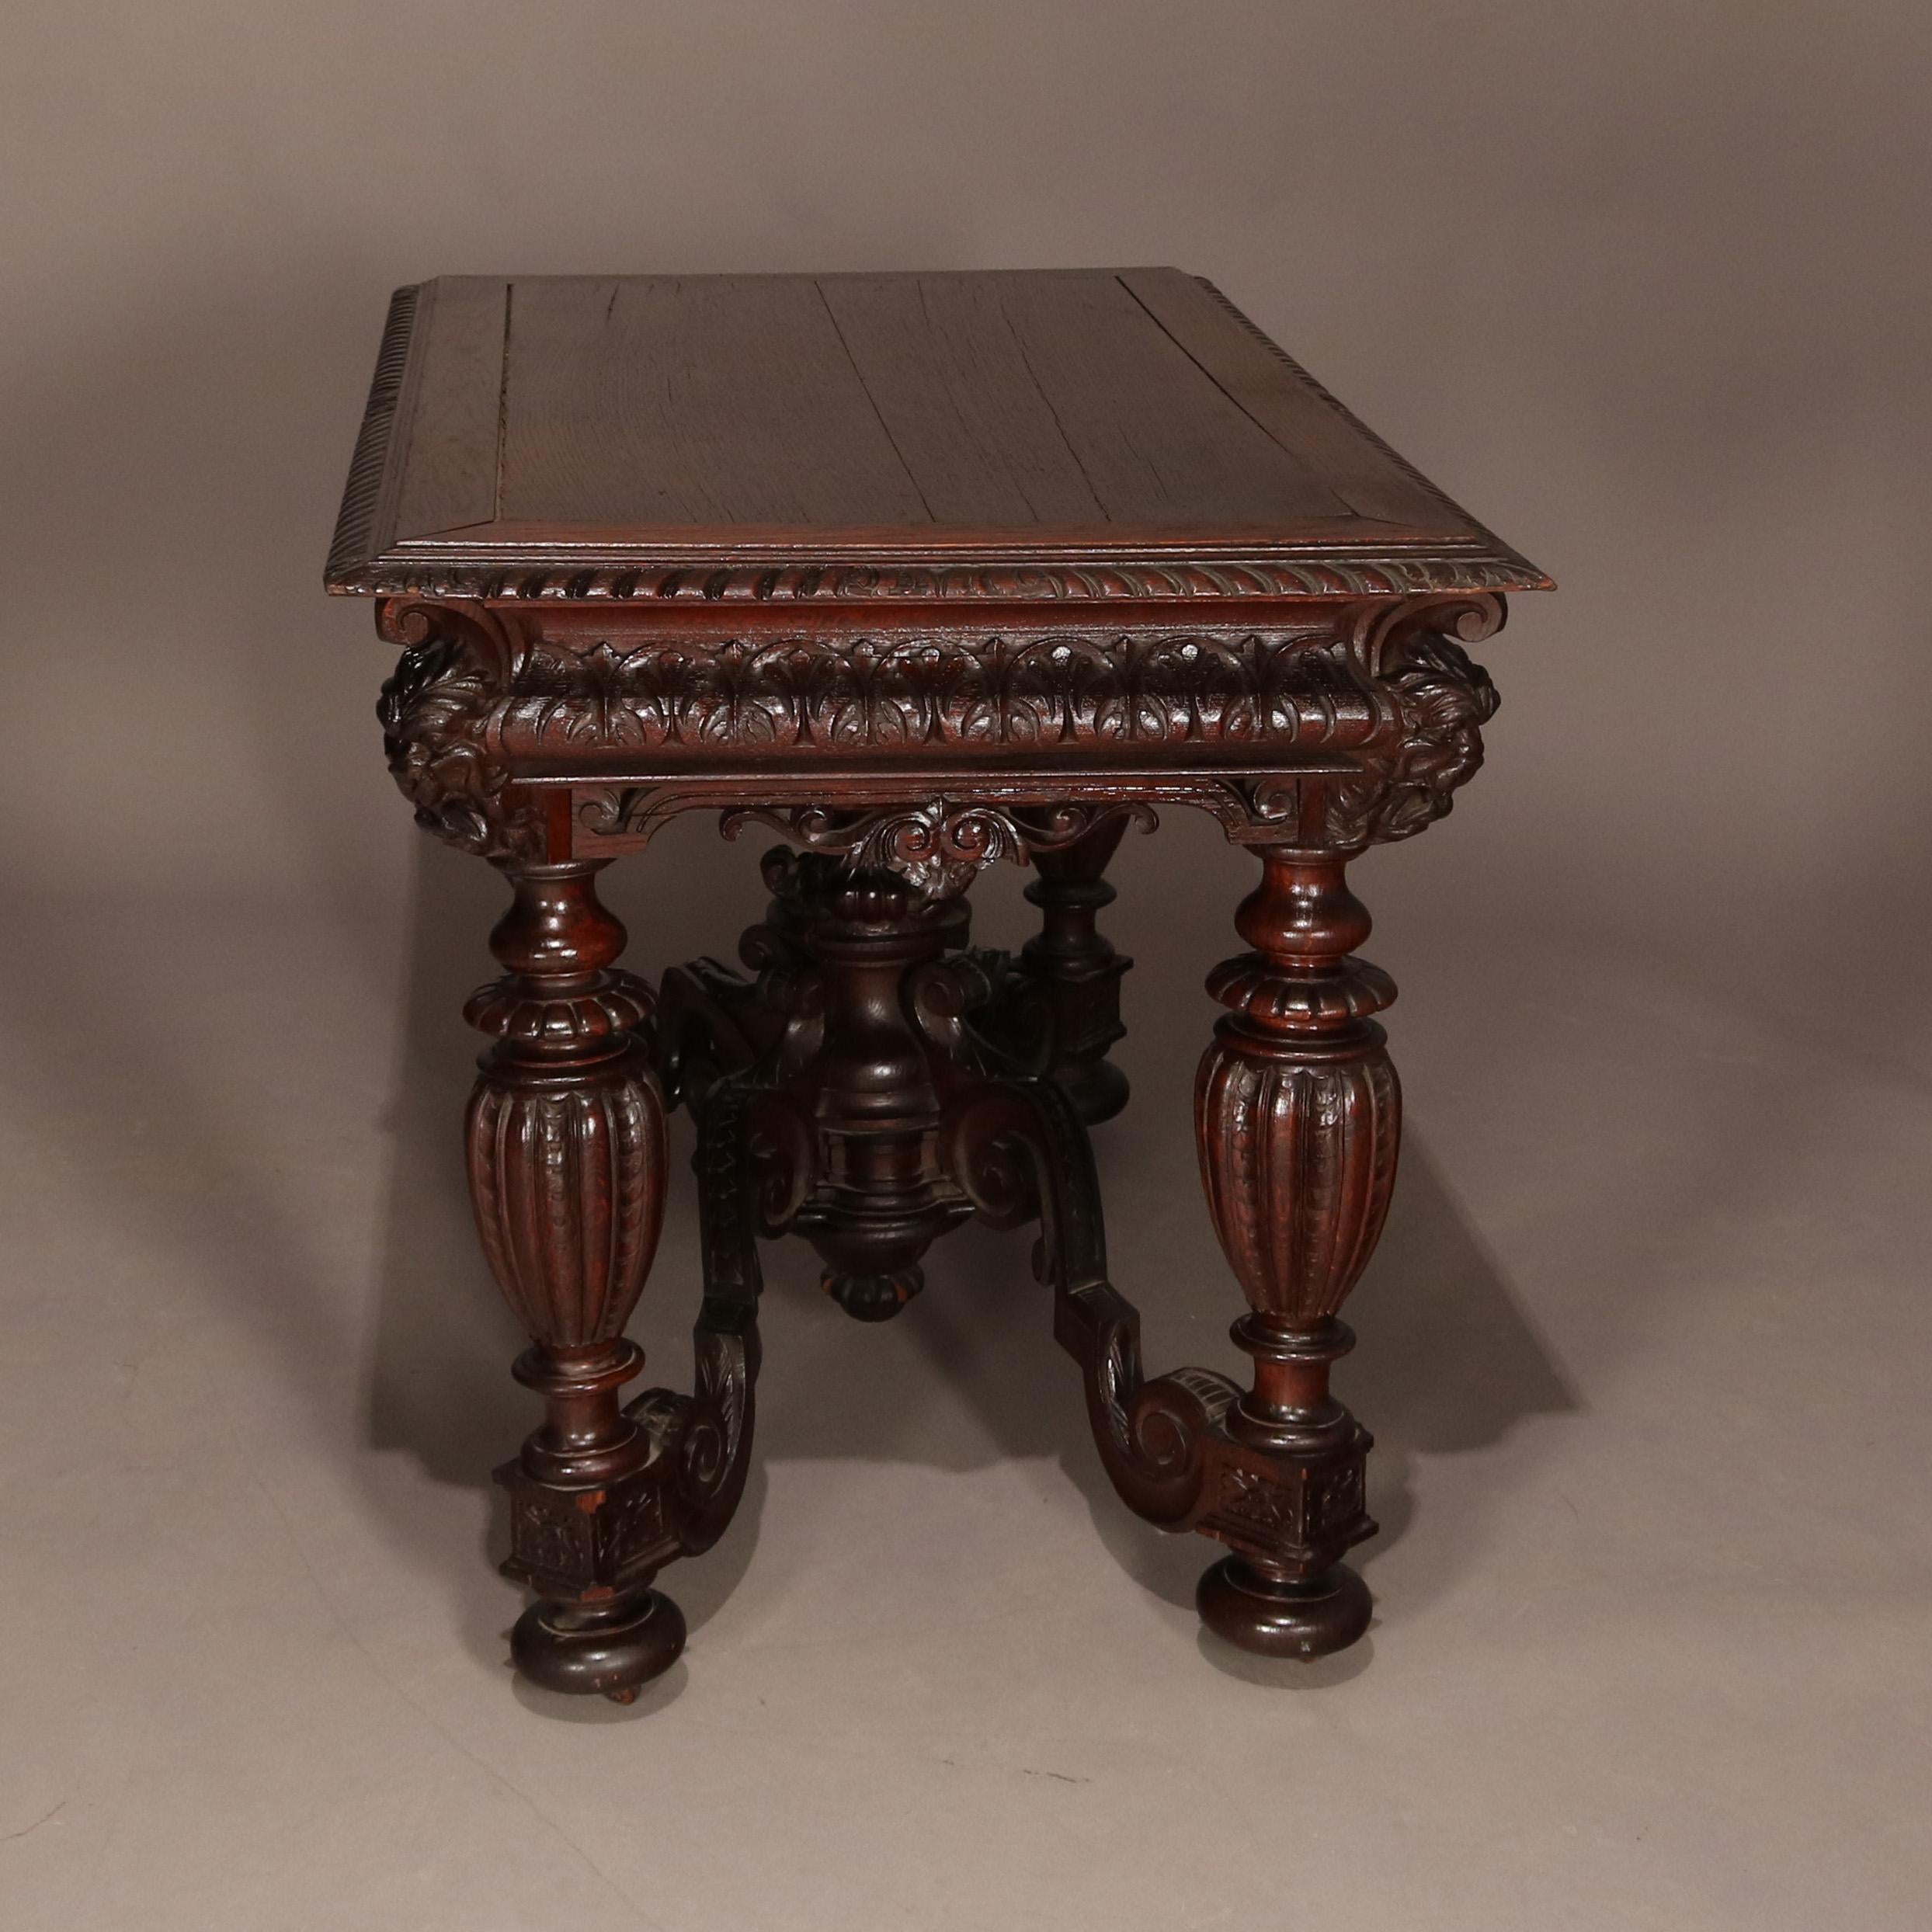 An antique Italian Baroque style figural carved mahogany library table features beveled top surmounting foliate carved apron with masks and pierced scroll form decoration and raised on heavily carved urn form legs with scroll form cross stretchers